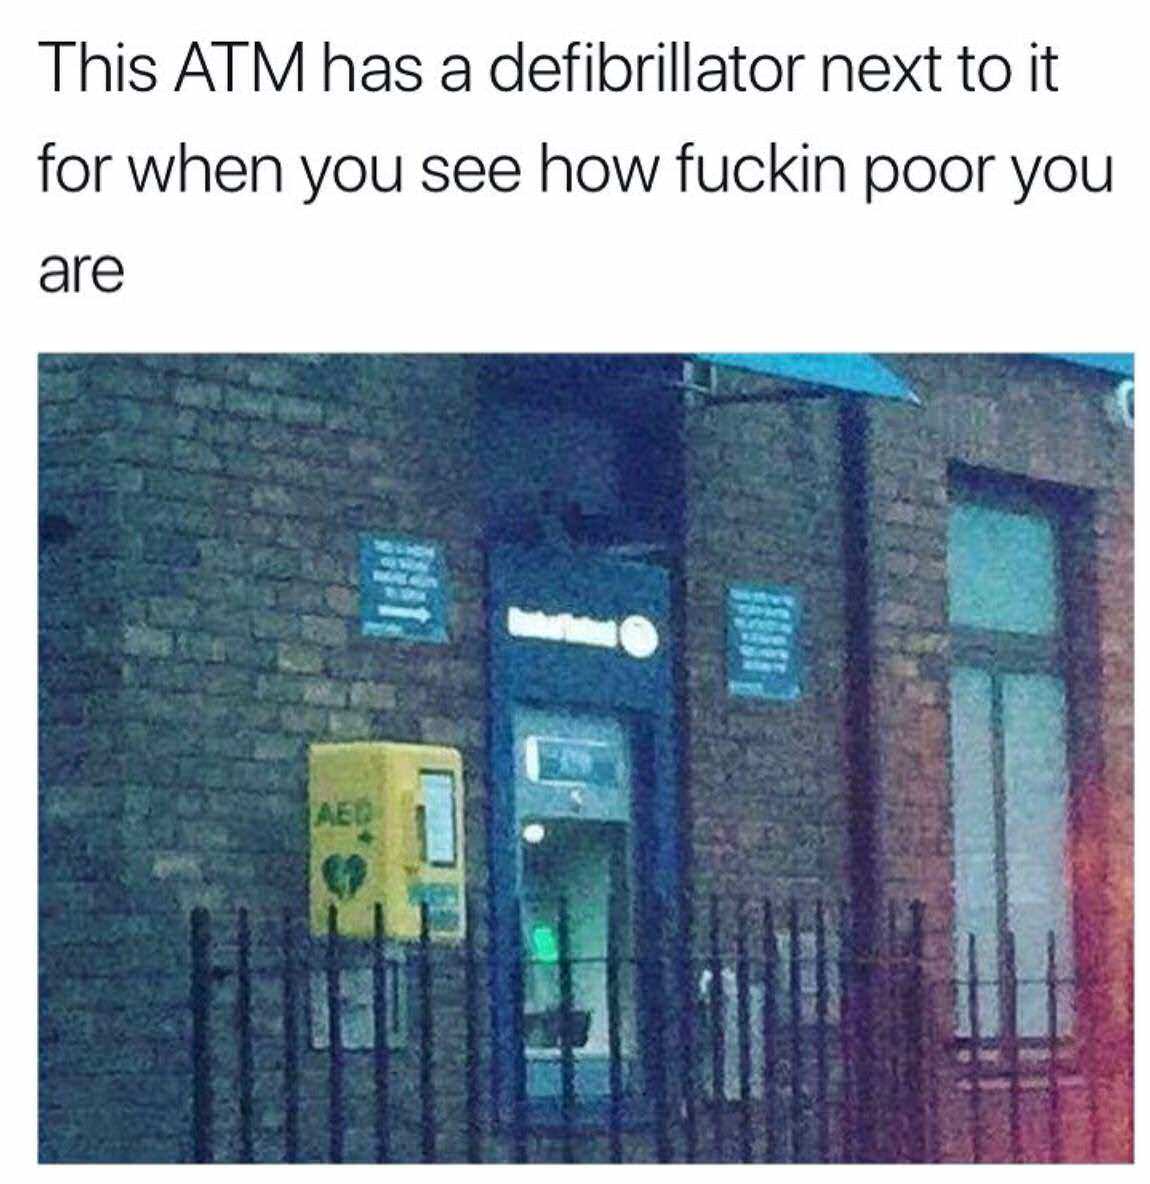 atm defibrillator meme - This Atm has a defibrillator next to it for when you see how fuckin poor you are